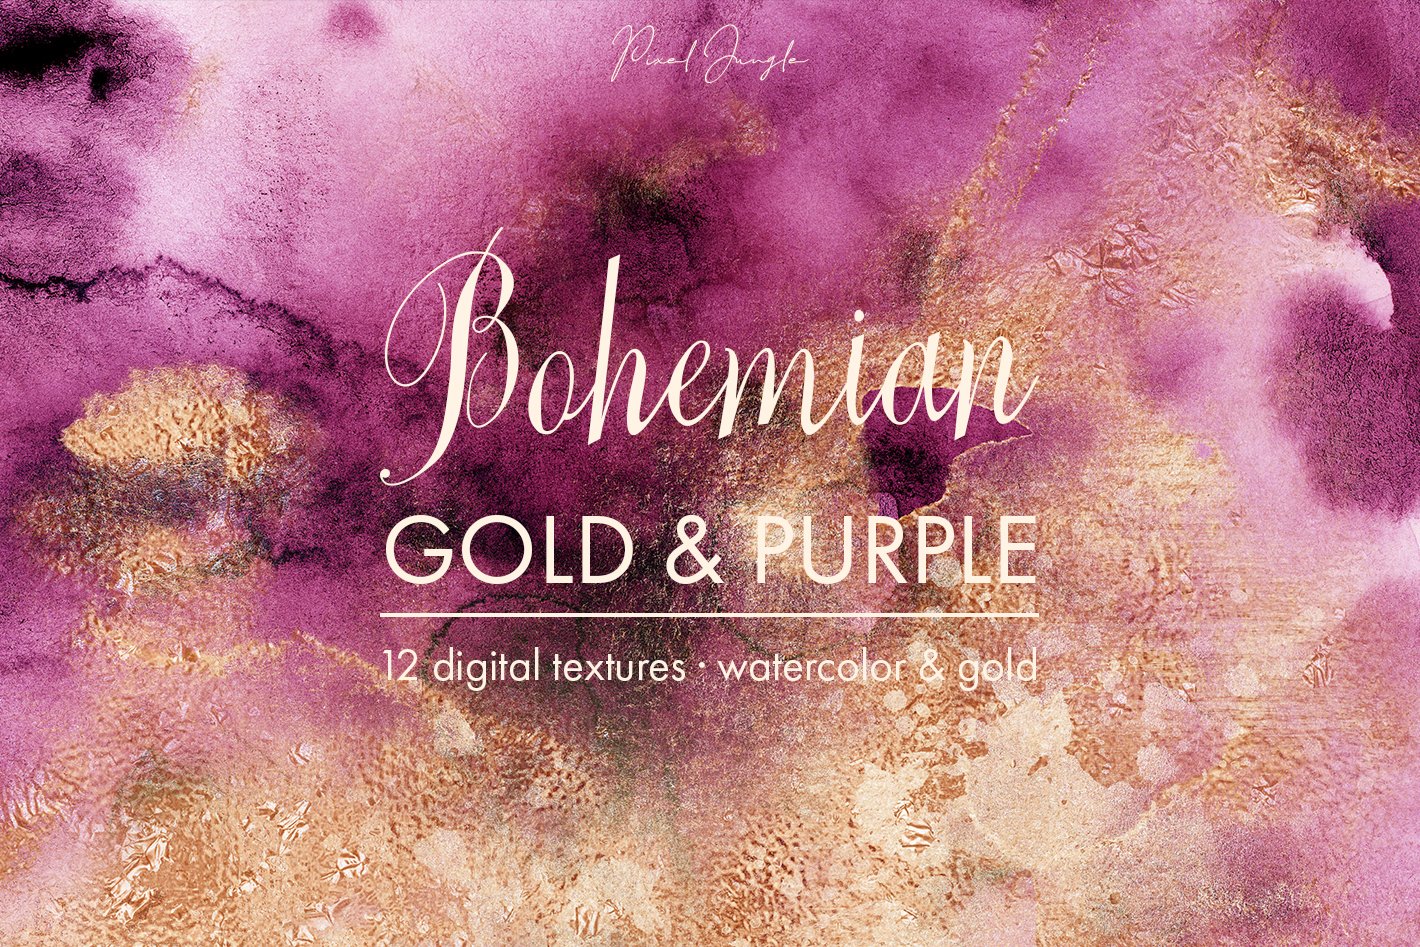 Bohemian watercolor & gold textures cover image.